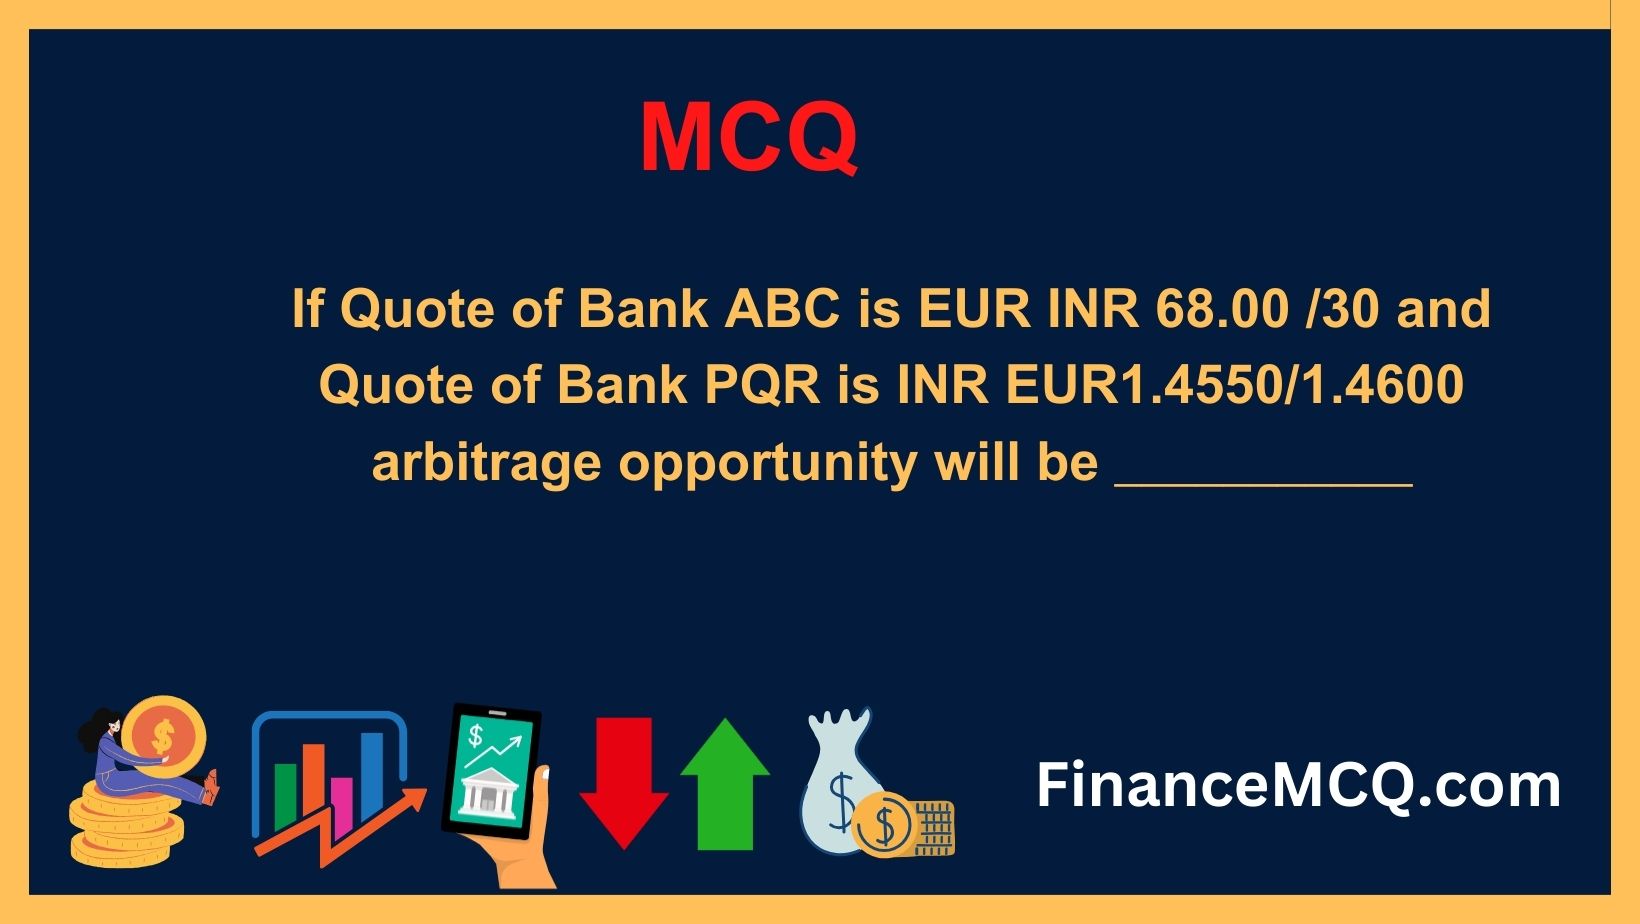 If Quote of Bank ABC is EUR INR 68.00 30 and Quote of Bank PQR is INR EUR1.45501.4600, arbitrage opportunity will be _________